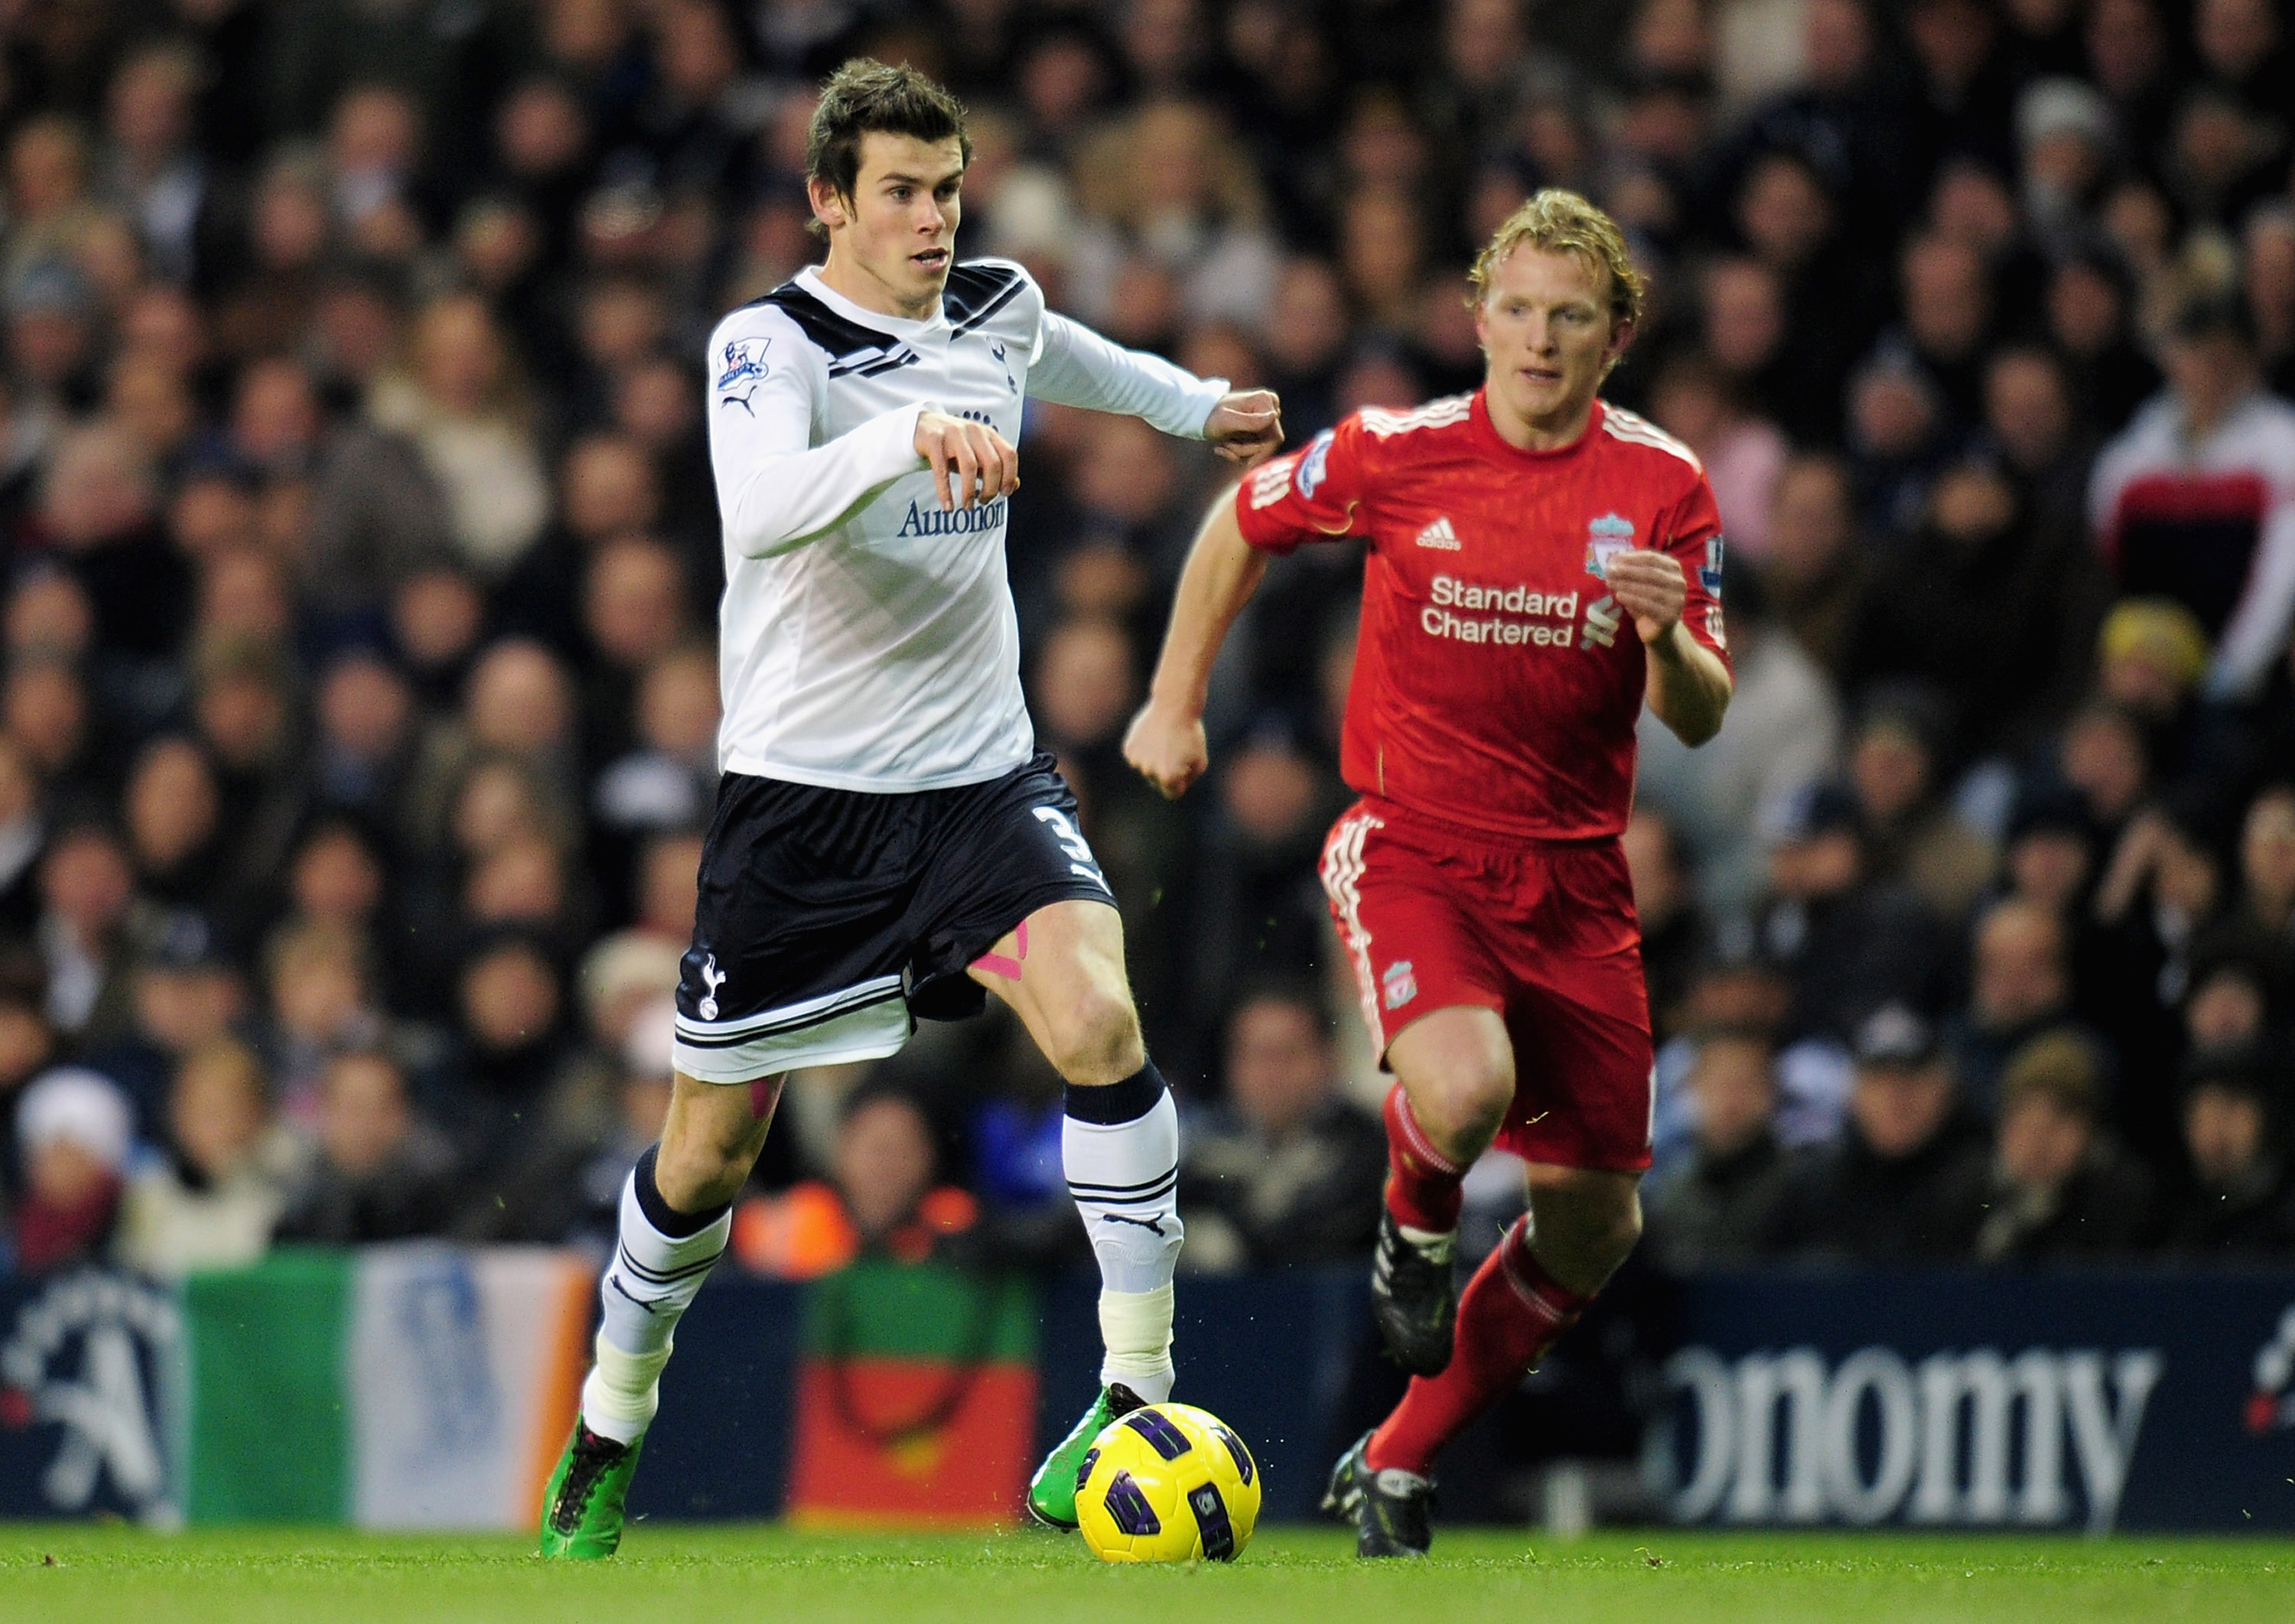 LONDON, ENGLAND - NOVEMBER 28:  Gareth Bale of Tottenham Hotspur runs with the ball as Dirk Kuyt of Liverpool tries to close him down during the Barclays Premier League match between Tottenham Hotspur and Liverpool at White Hart Lane on November 28, 2010